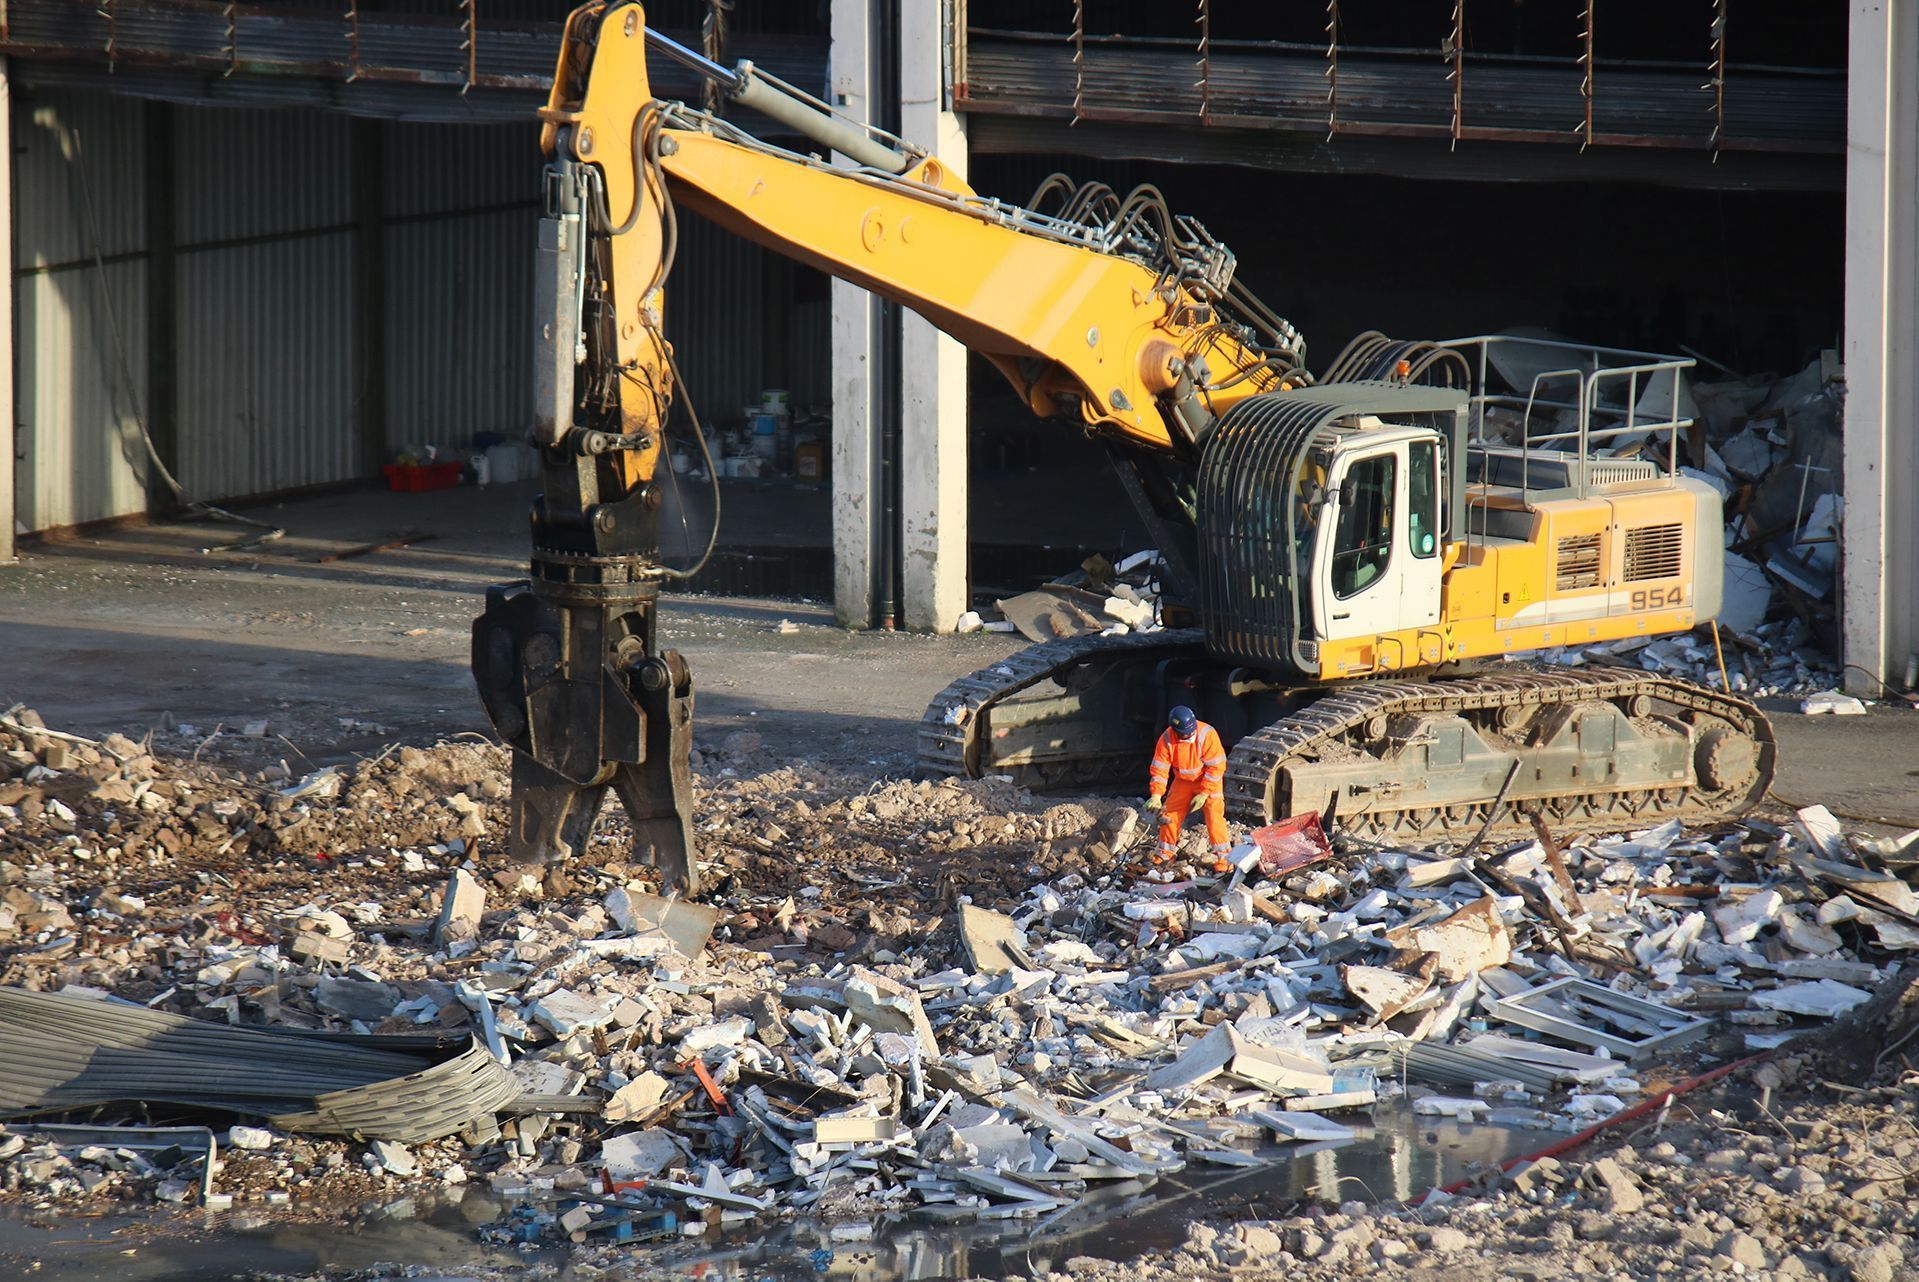 A large yellow excavator is working on a pile of rubble.